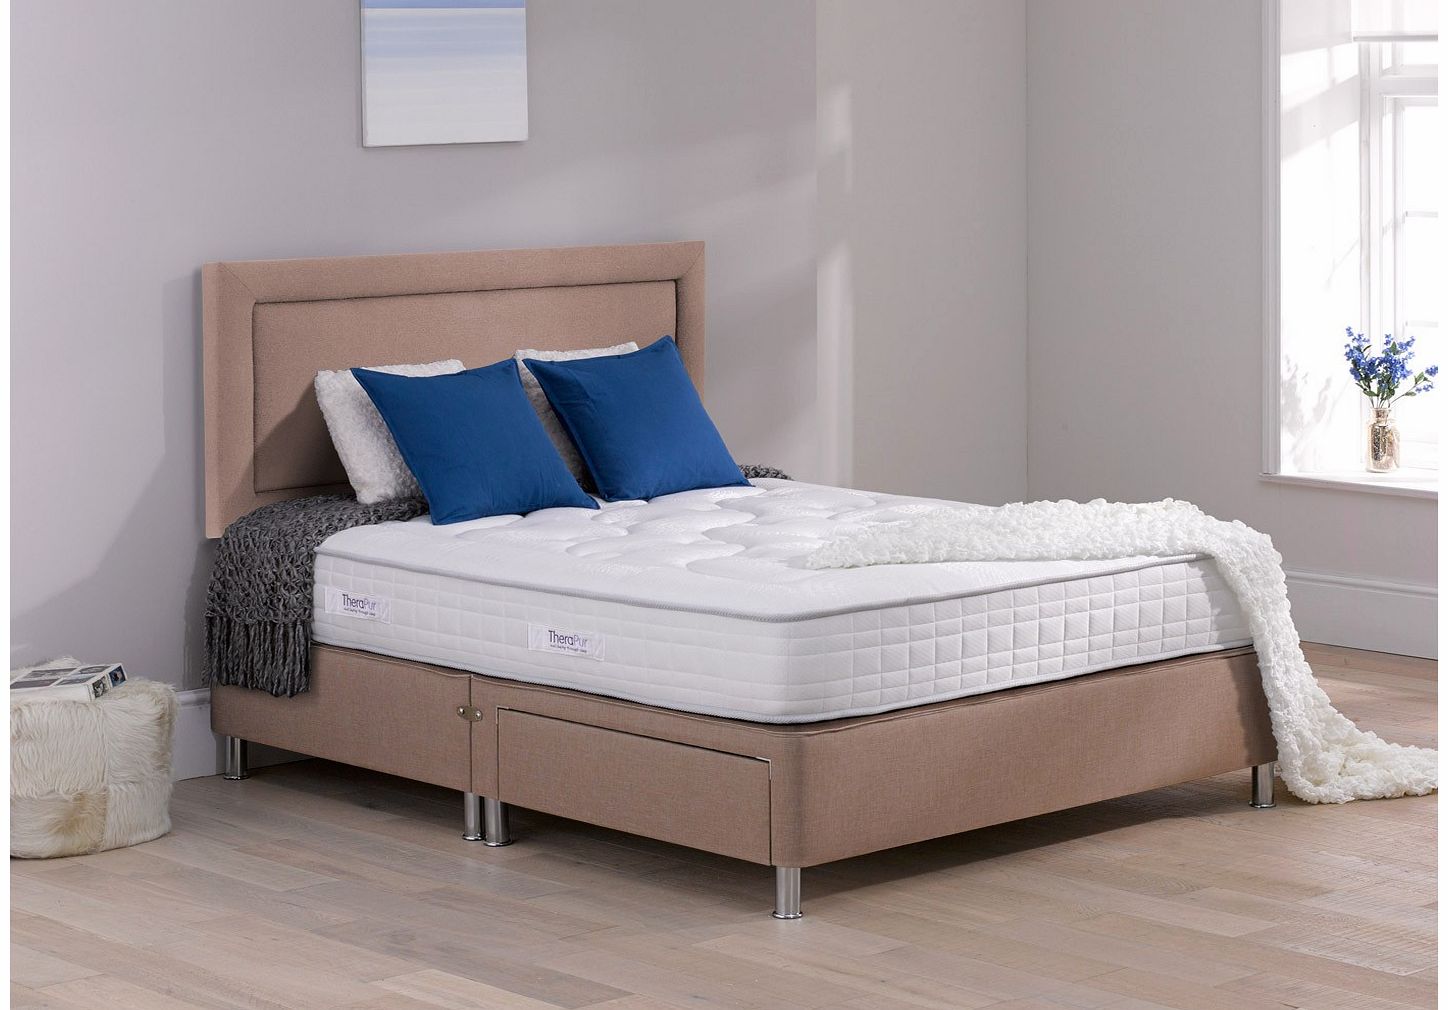 4`6 Double Therapur Tranquility Divan Bed With Legs -